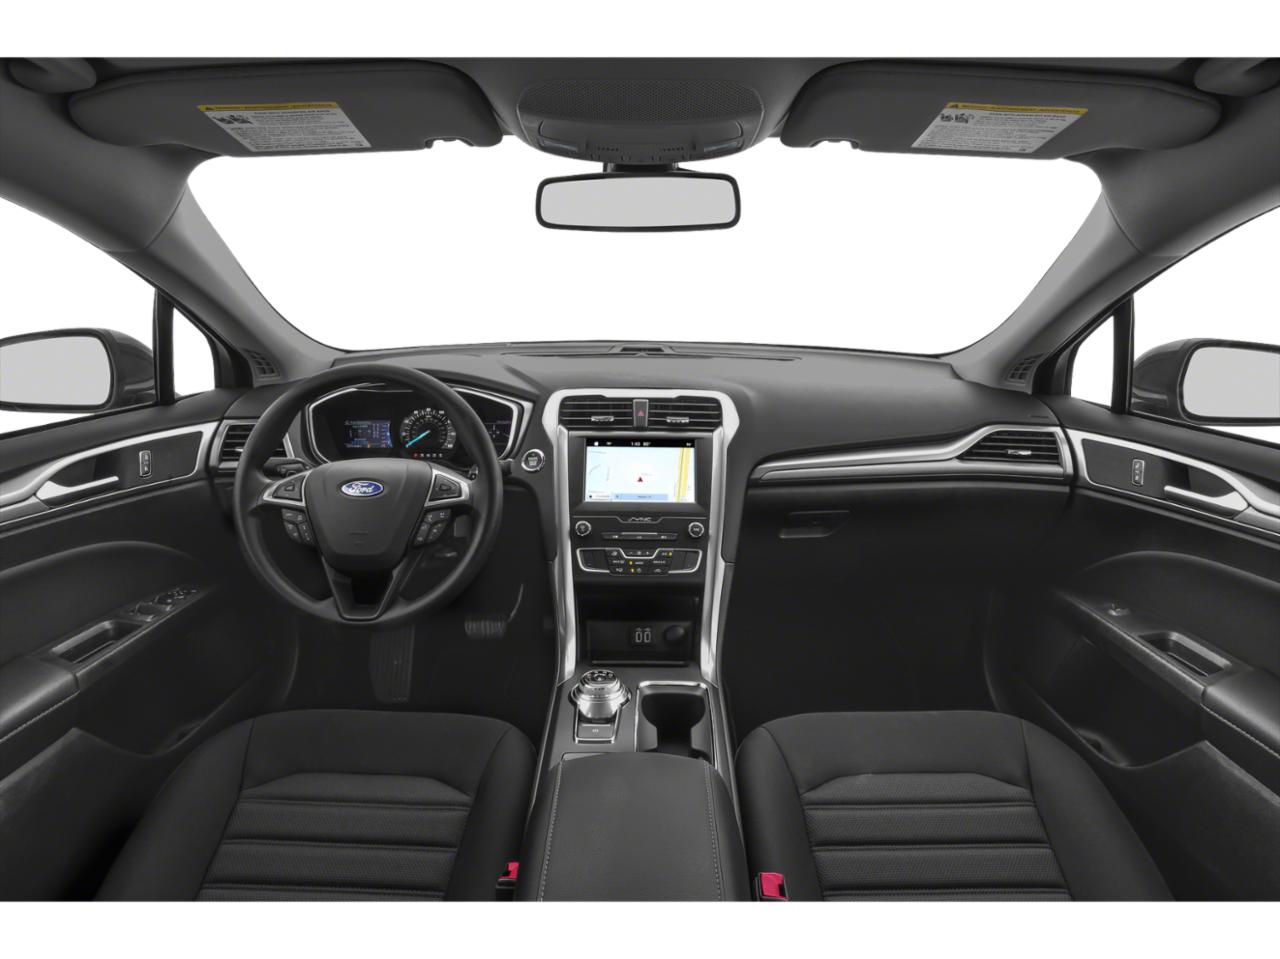 2019 Ford Fusion Vehicle Photo in Jacksonville, FL 32244